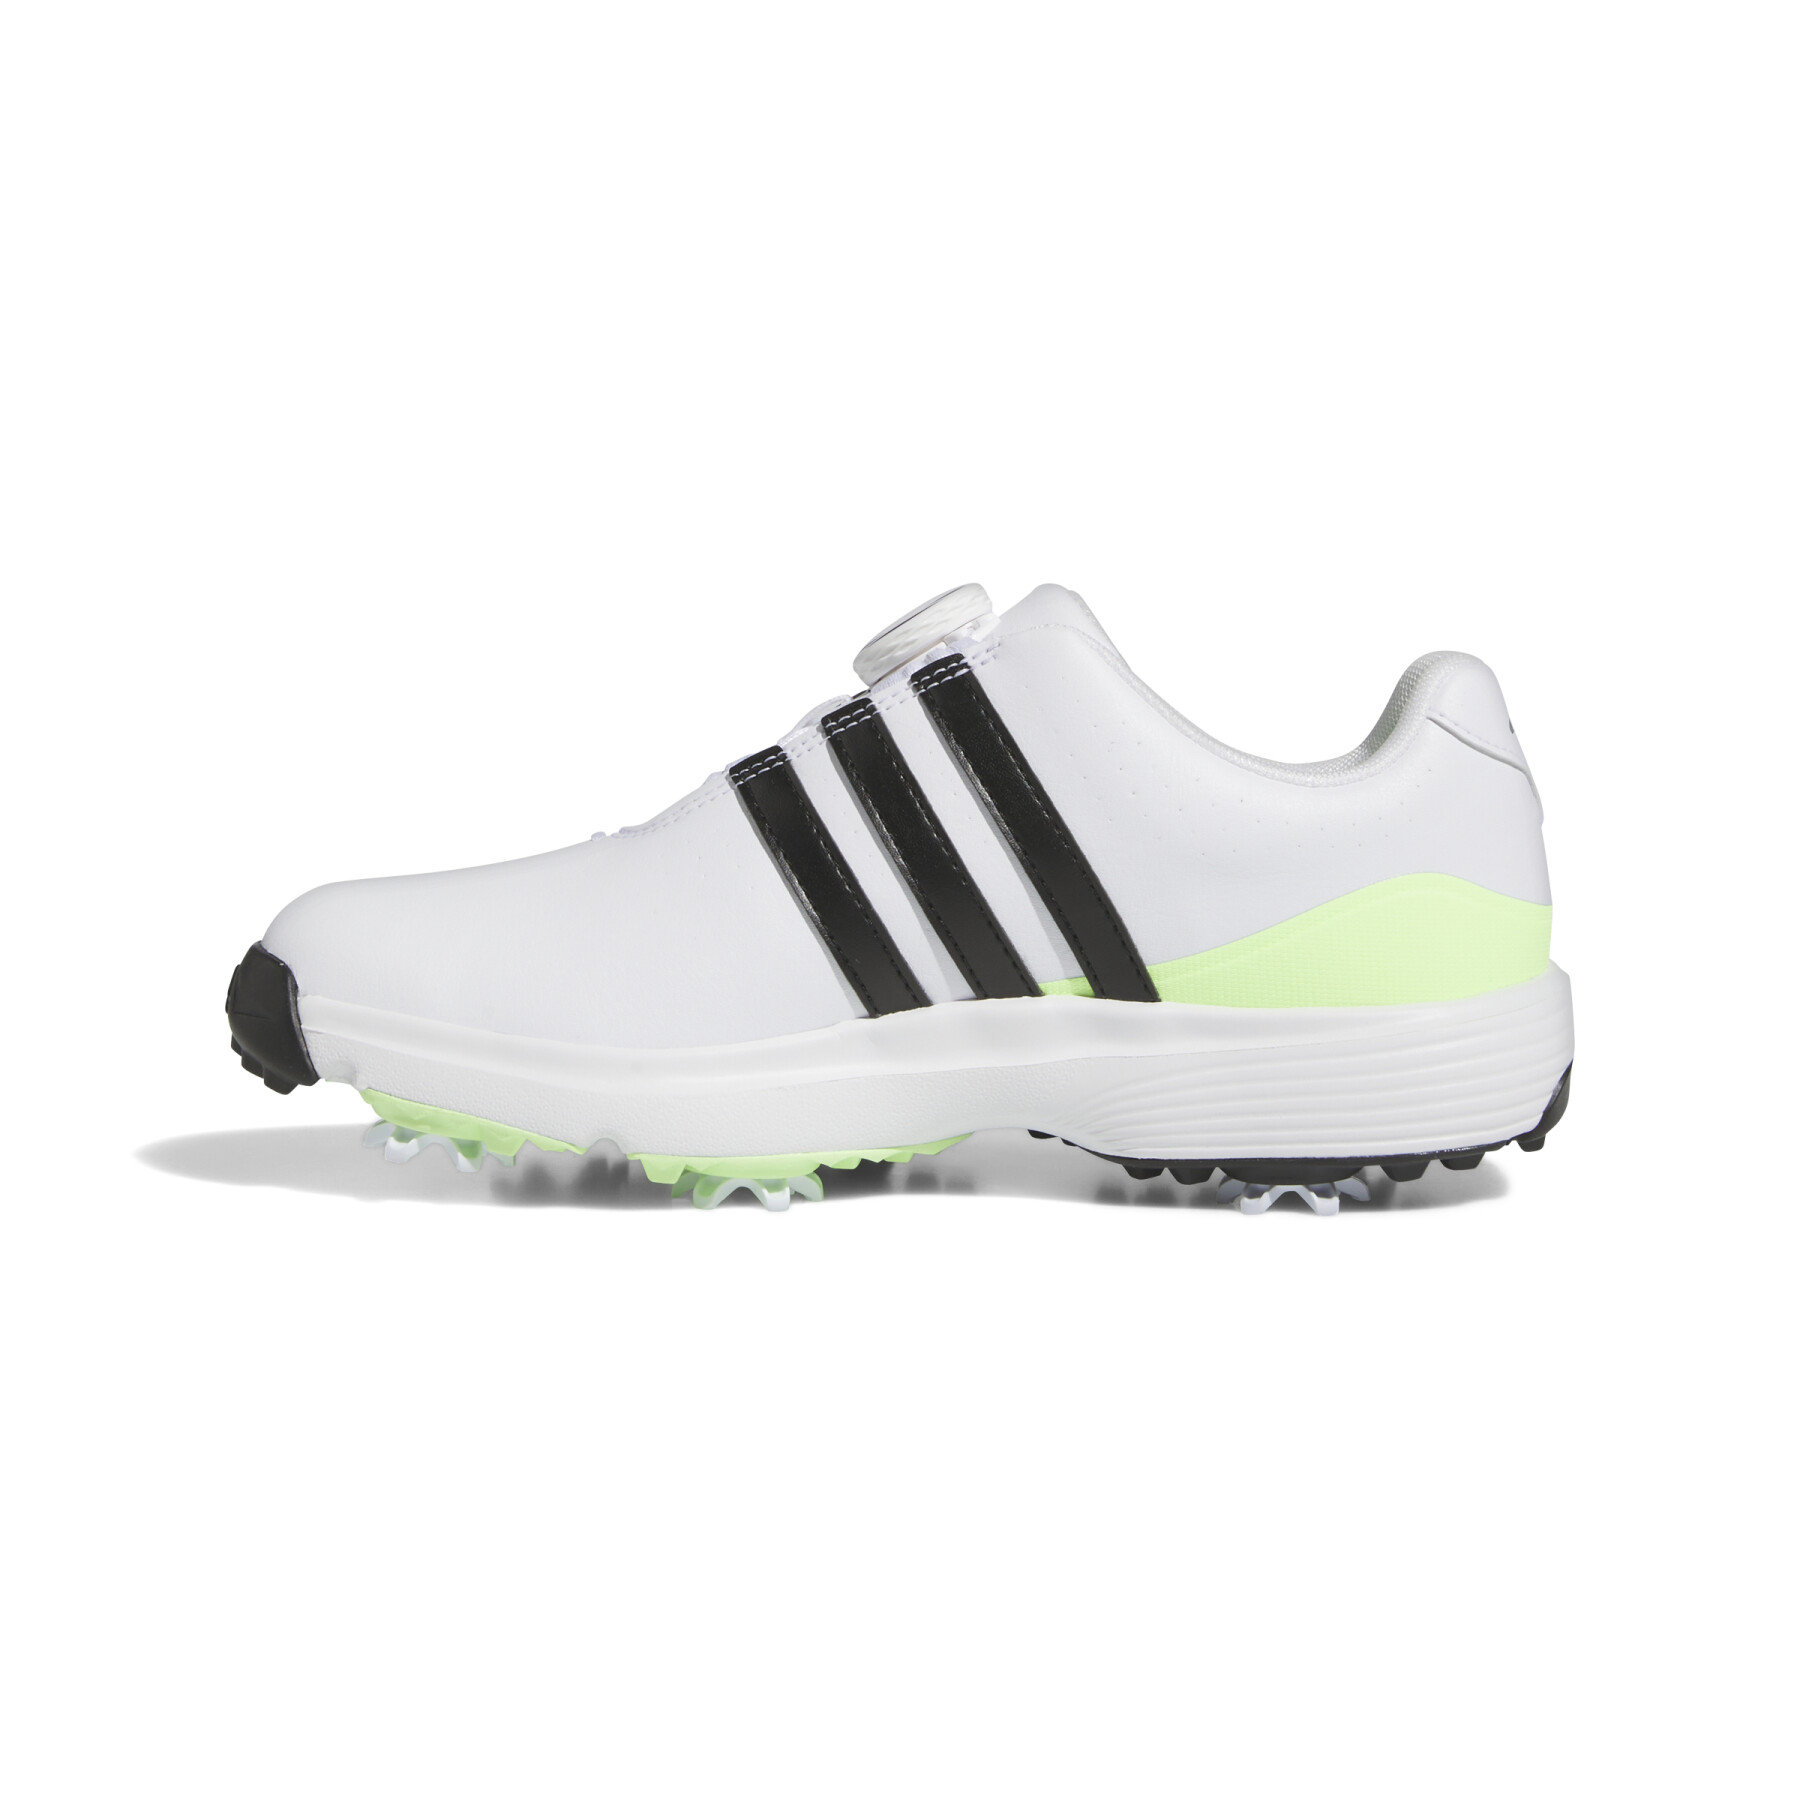 Children's spiked golf shoes adidas Tour360 24 BOA